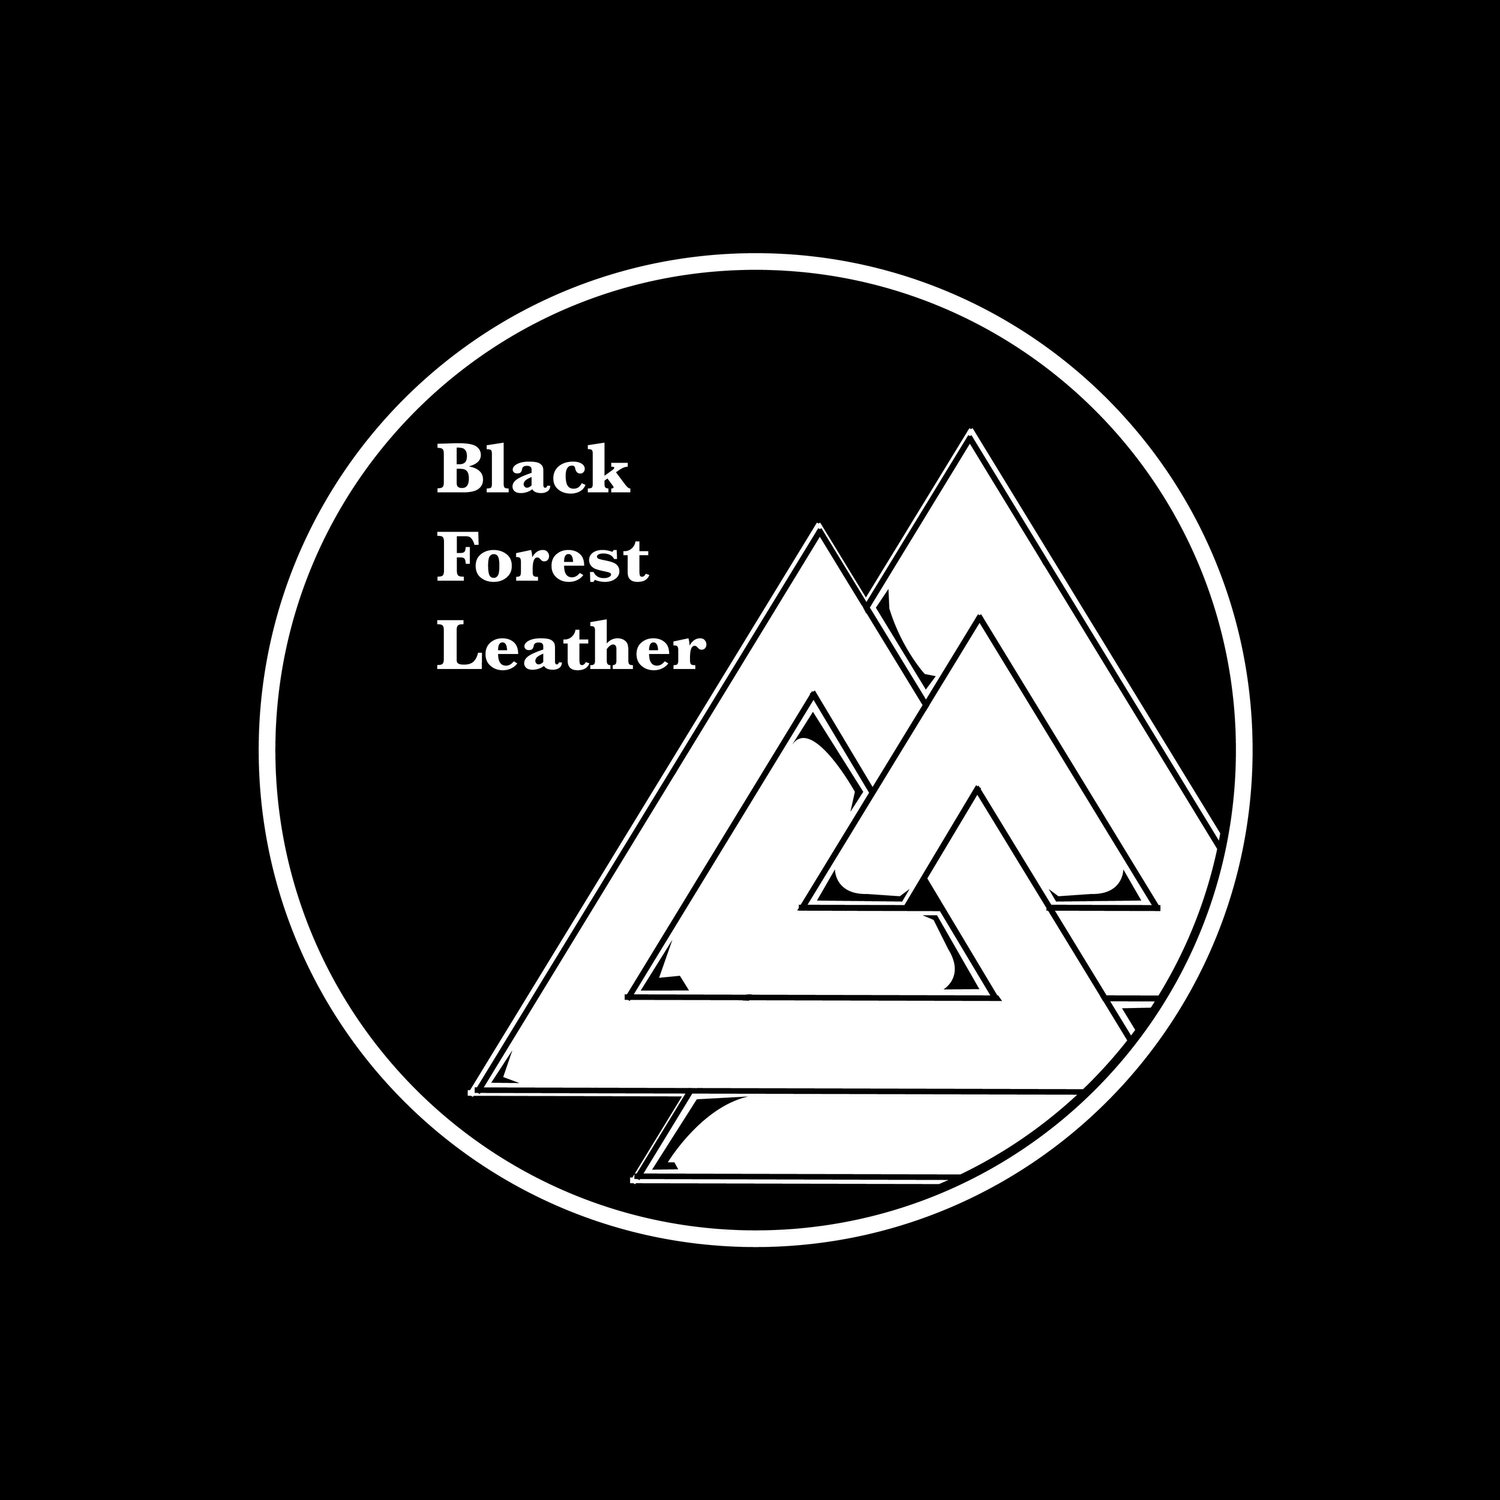 Black Forest Leather